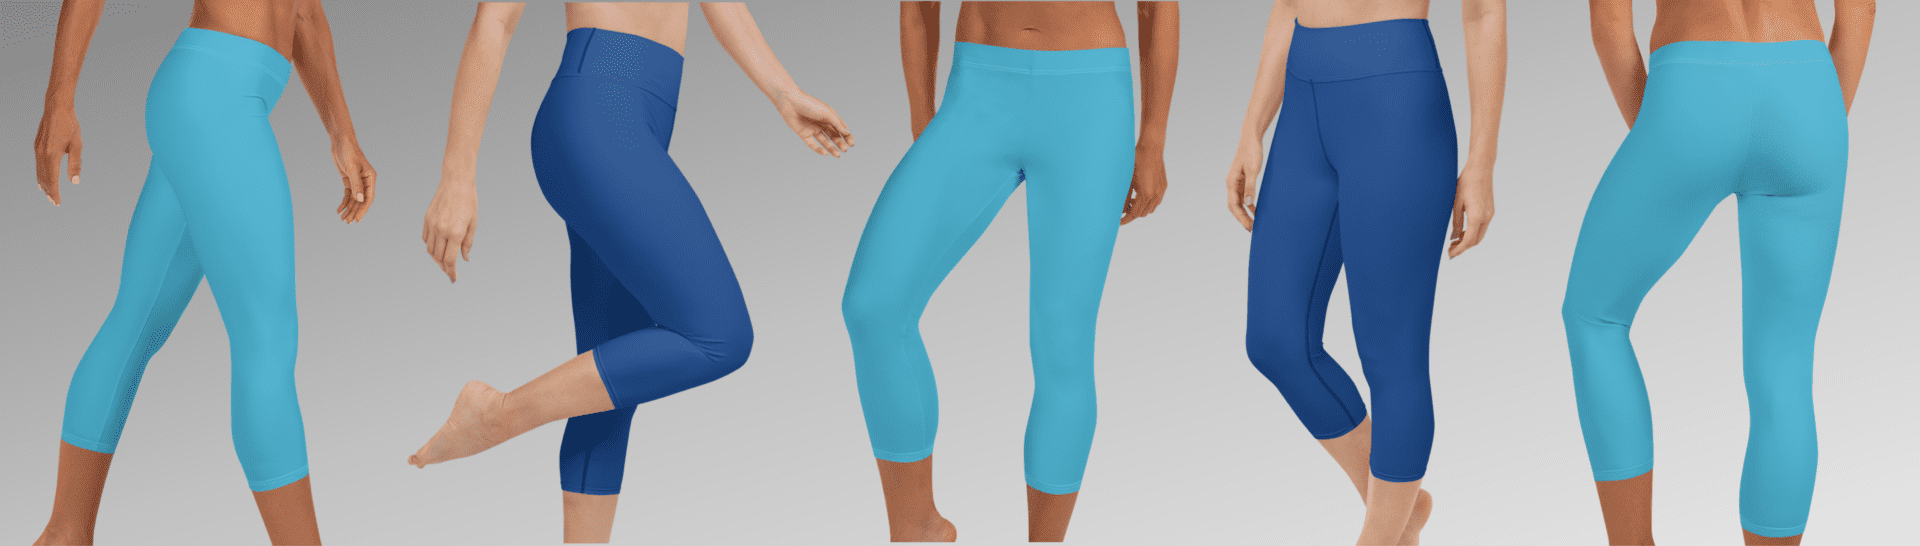 Women wearing blue and turquoise leggings.